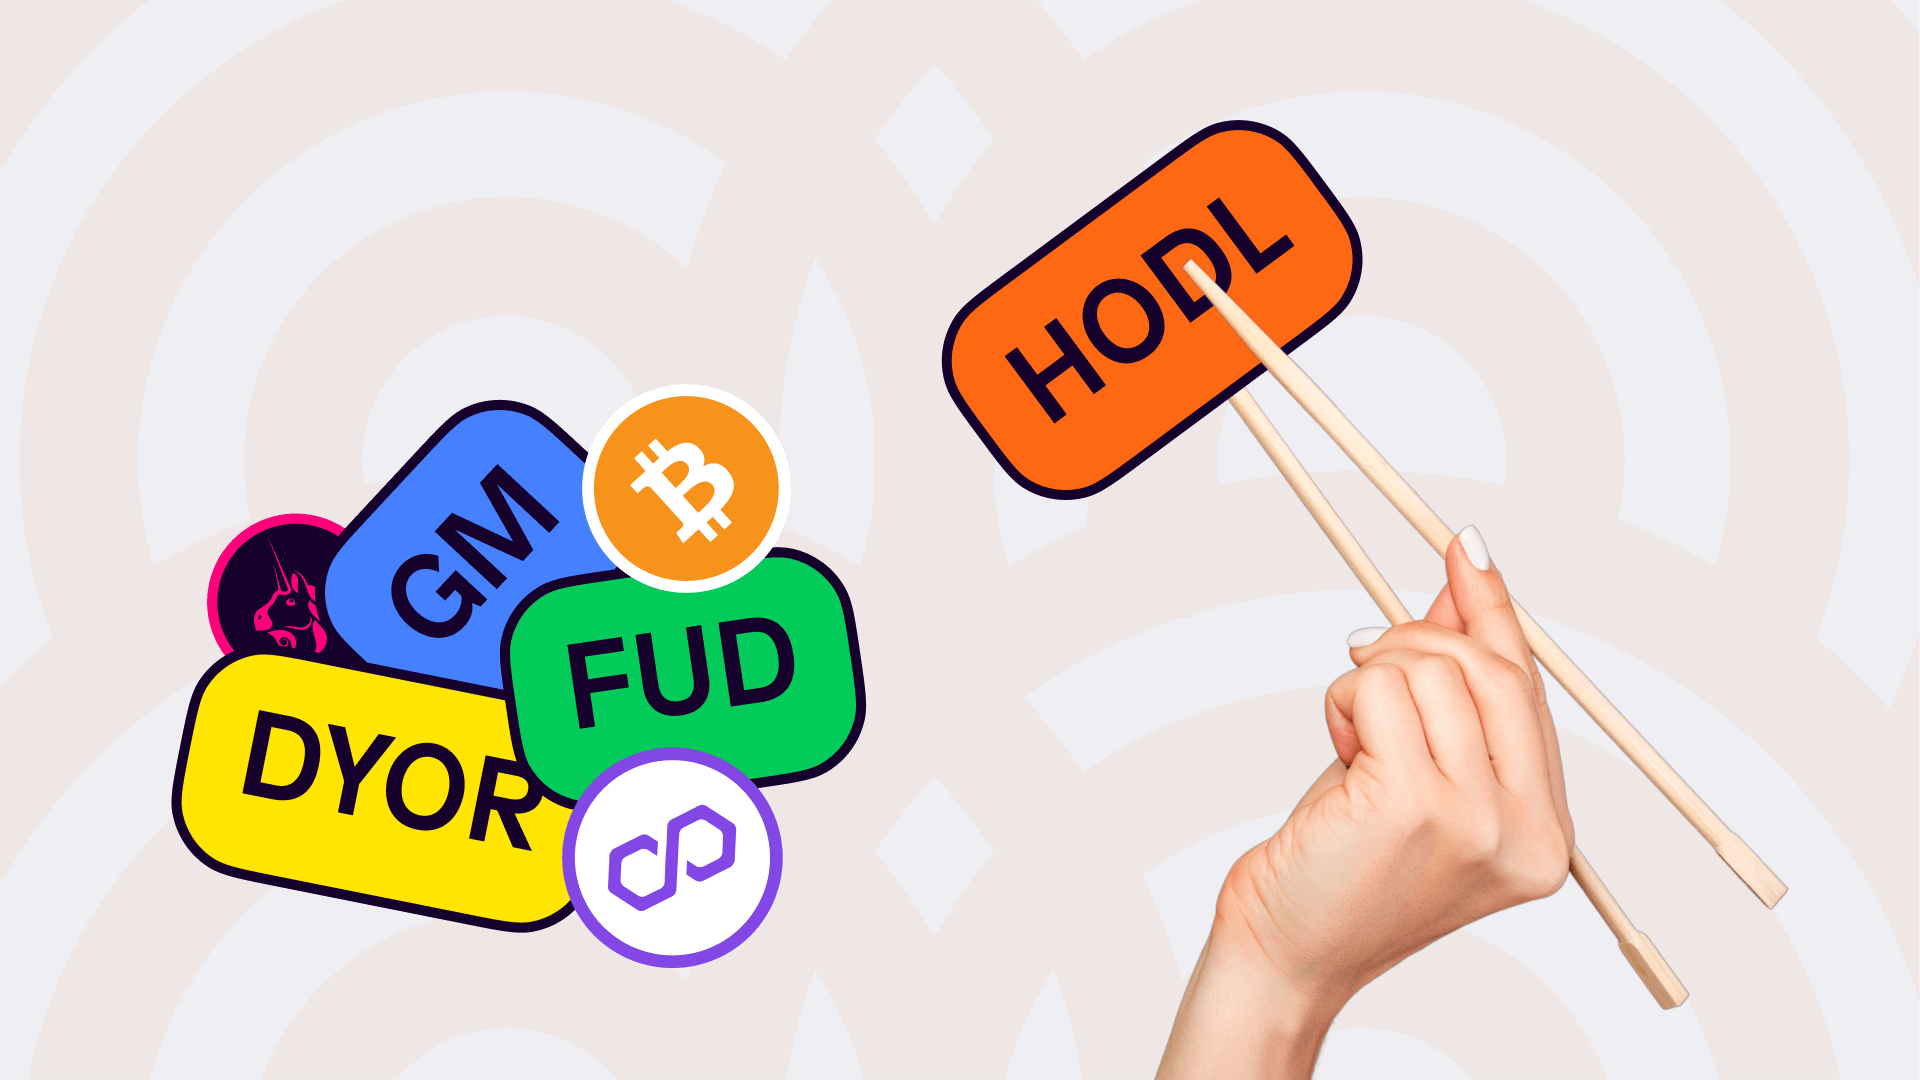 Top 10 crypto terms to know about. GM, DYOR, HODL etc